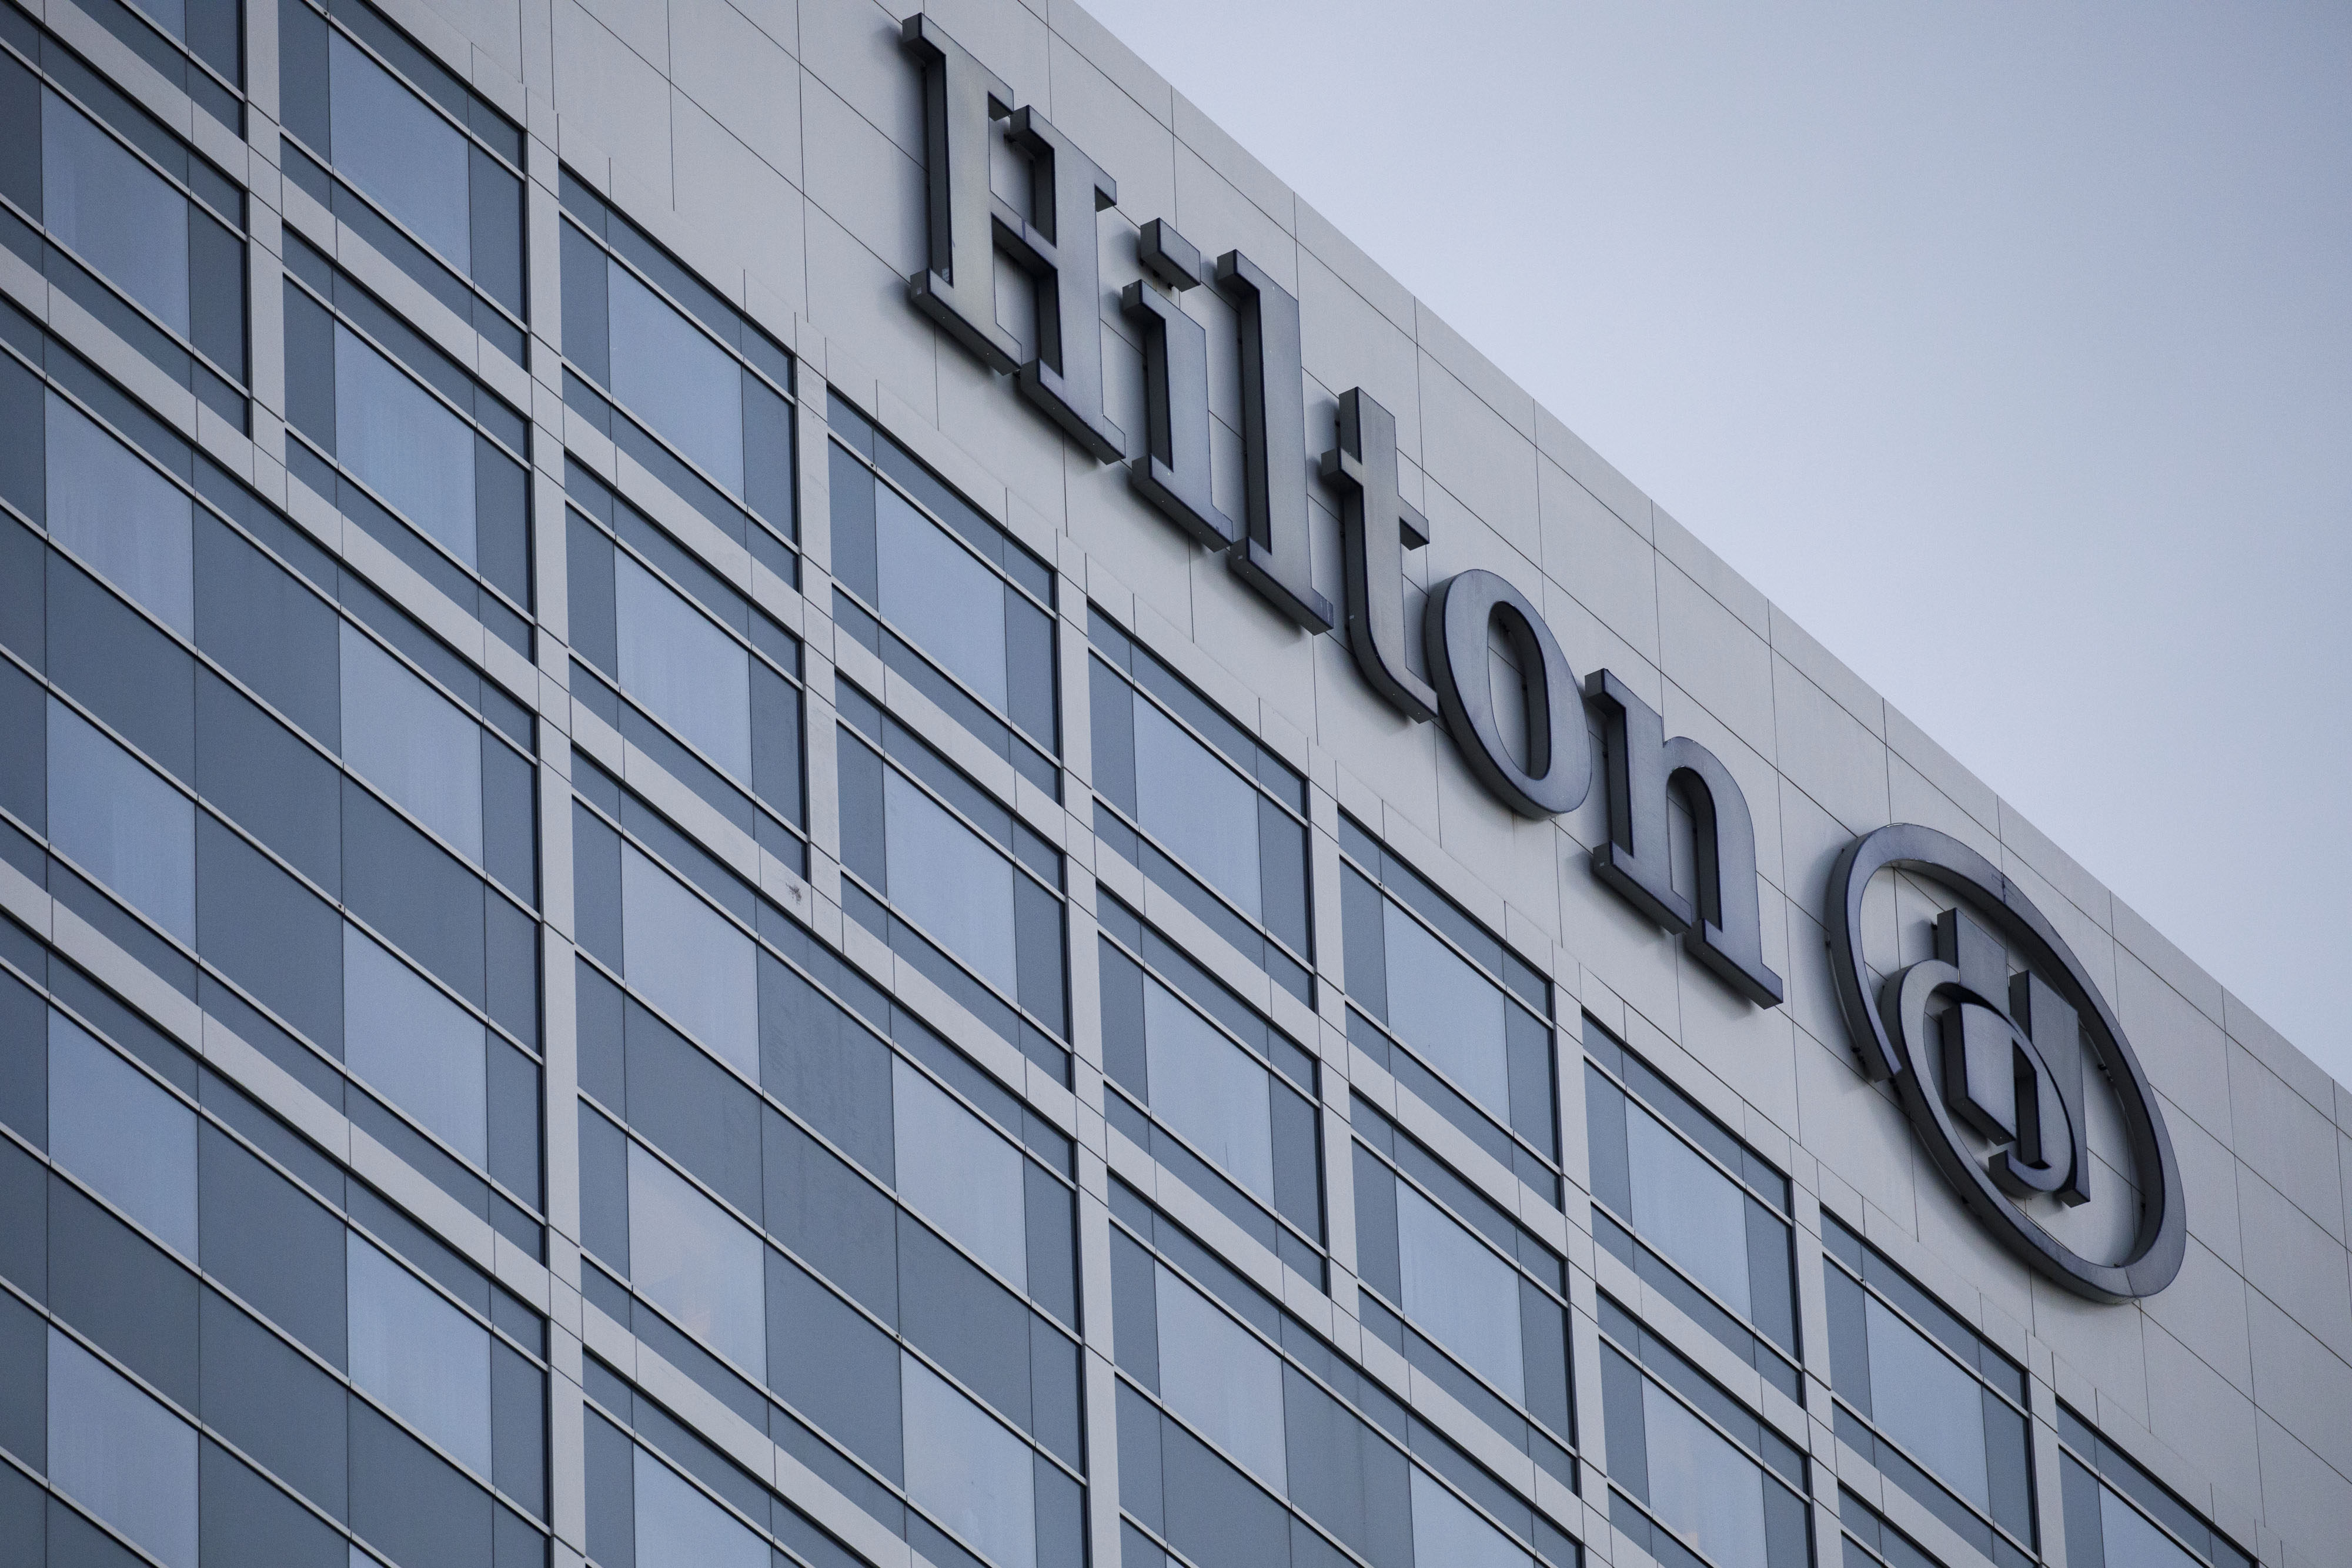 International hotel chain Hilton is betting big on China’s middle class. Photo: Bloomberg